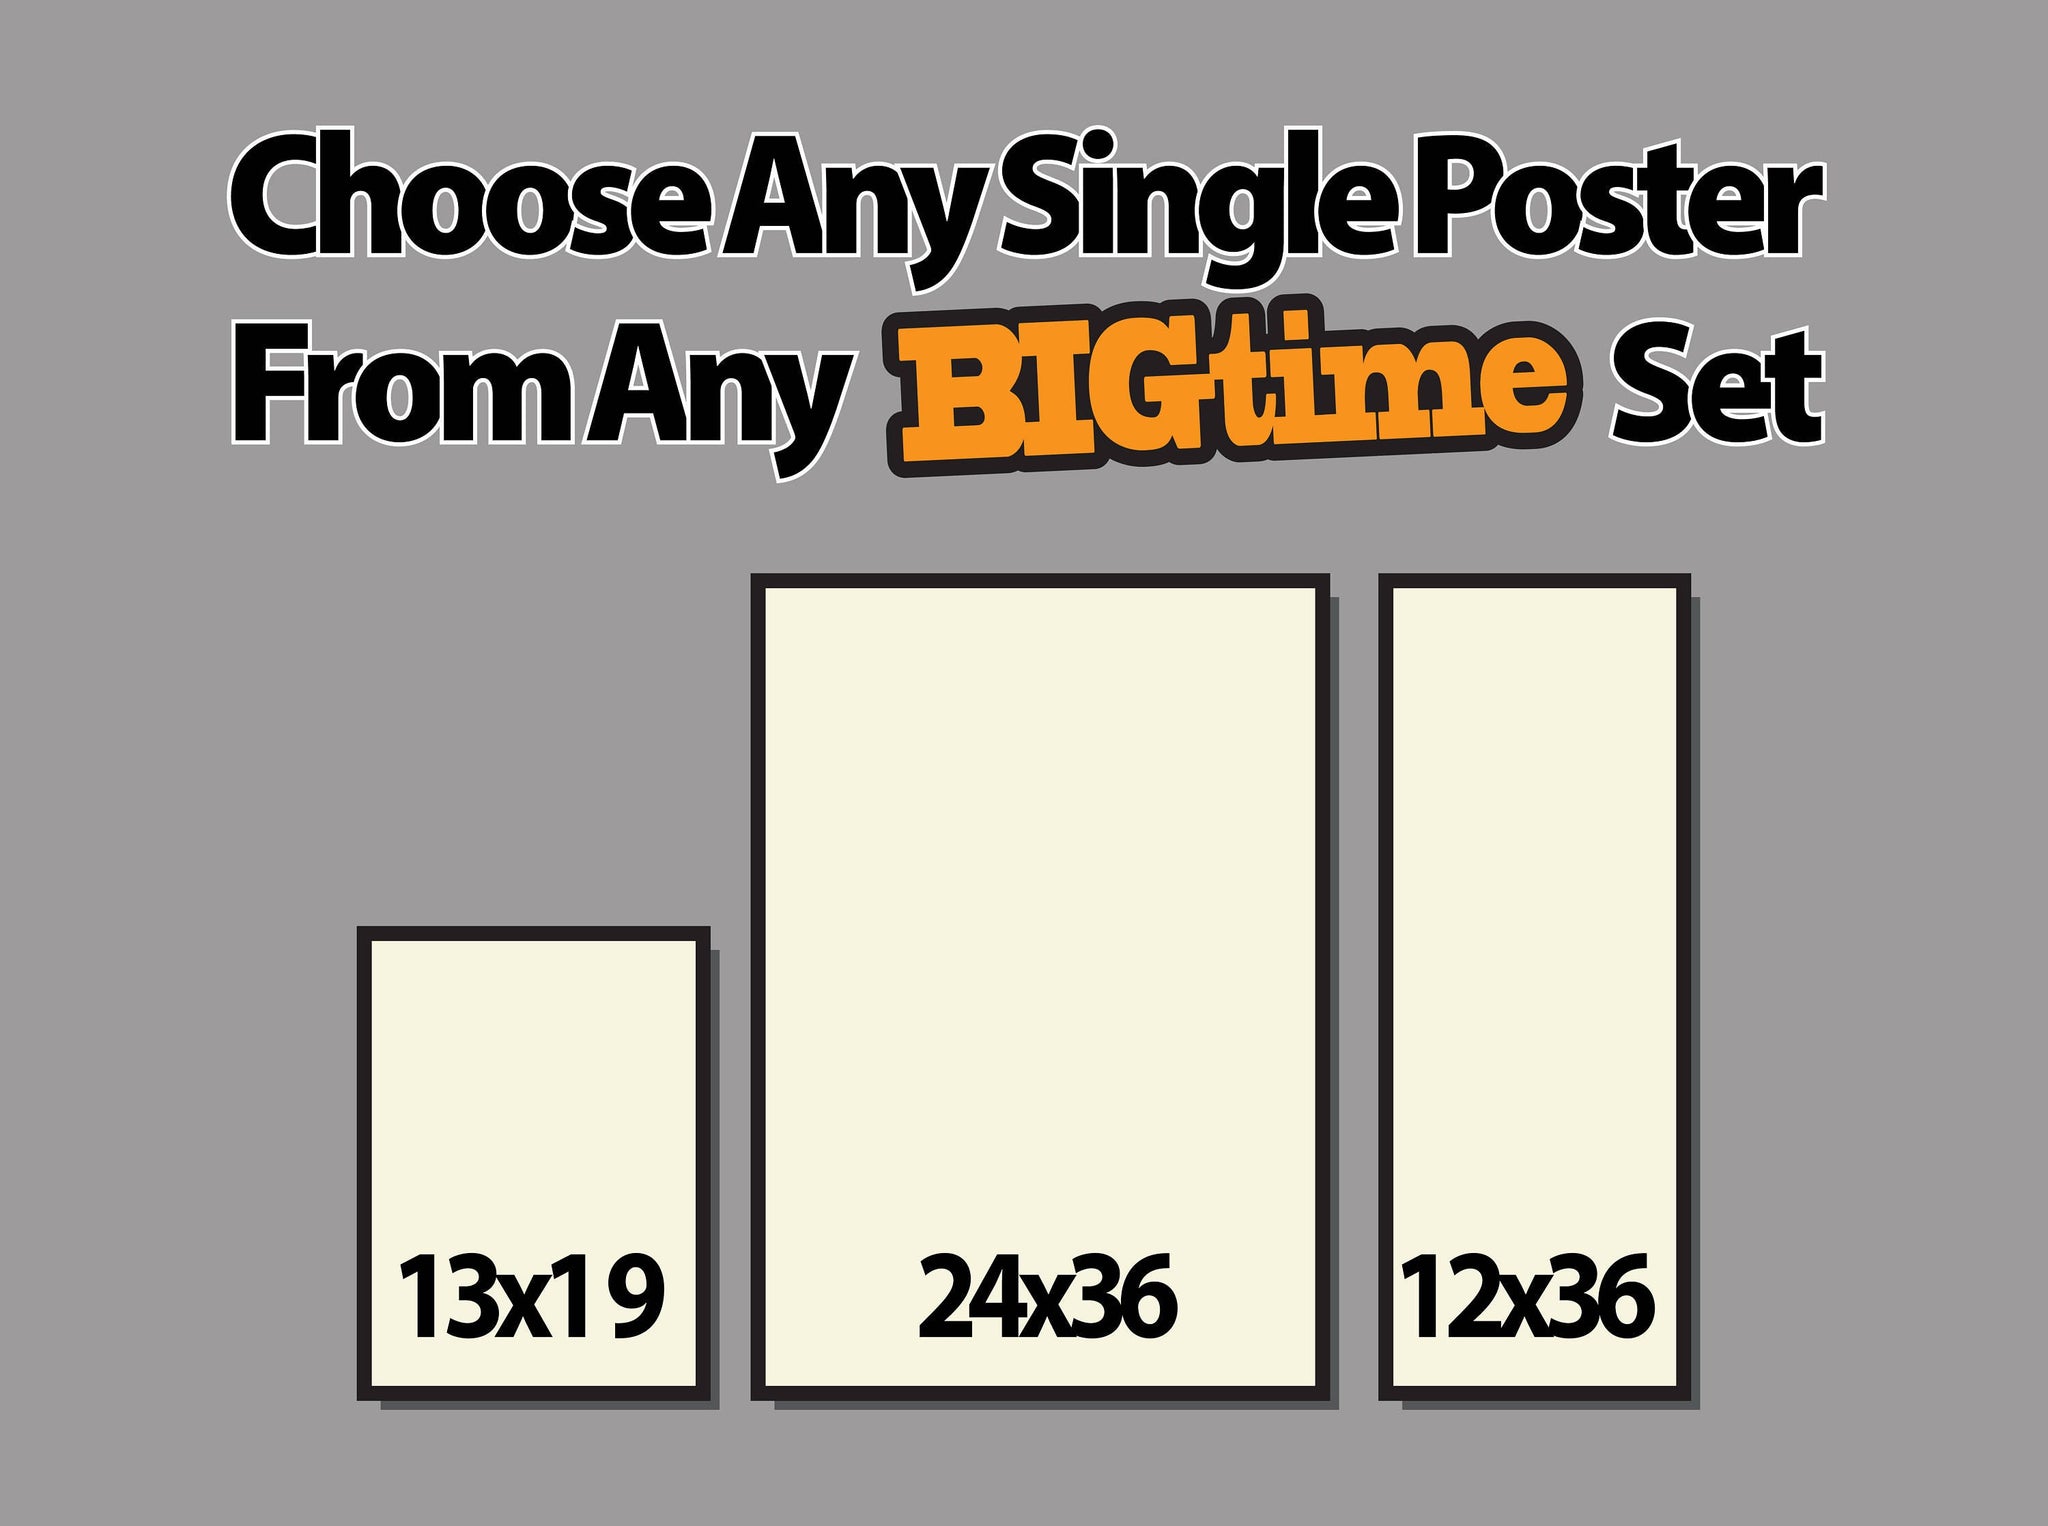 Choose Any Single Poster (13x19 inch) (24x36 Inch) (12x36 Inch) From Any Bigtime Set